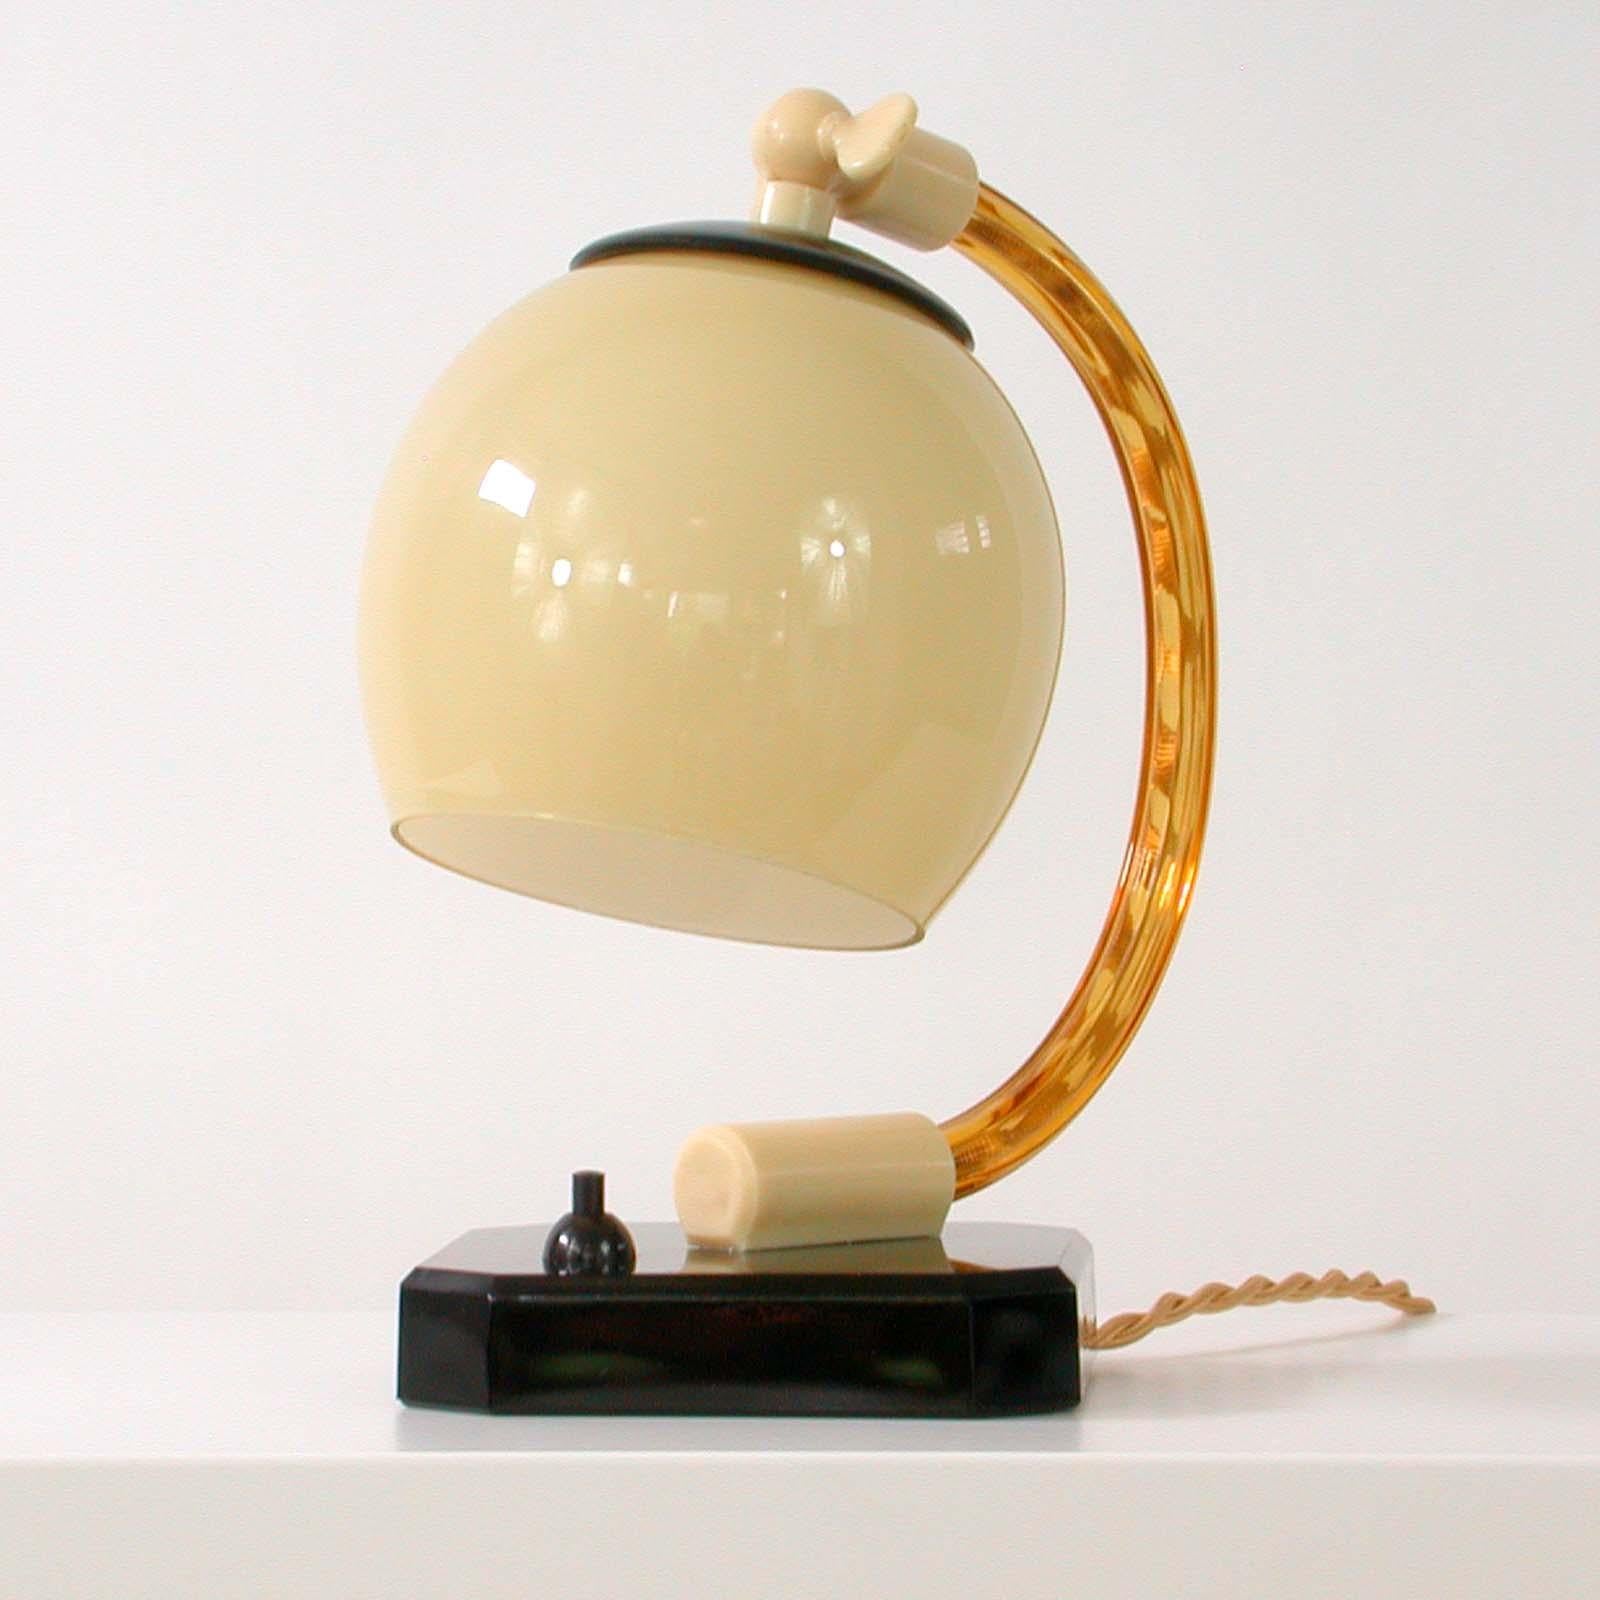 This unusual vintage table or bedside lamp was made in Germany in the 1930s during the Bauhaus period. It is made of black glass (base and top of lamp shade), amber colored clear glass (lamp arm), cream colored bakelite and has got an opaline glass